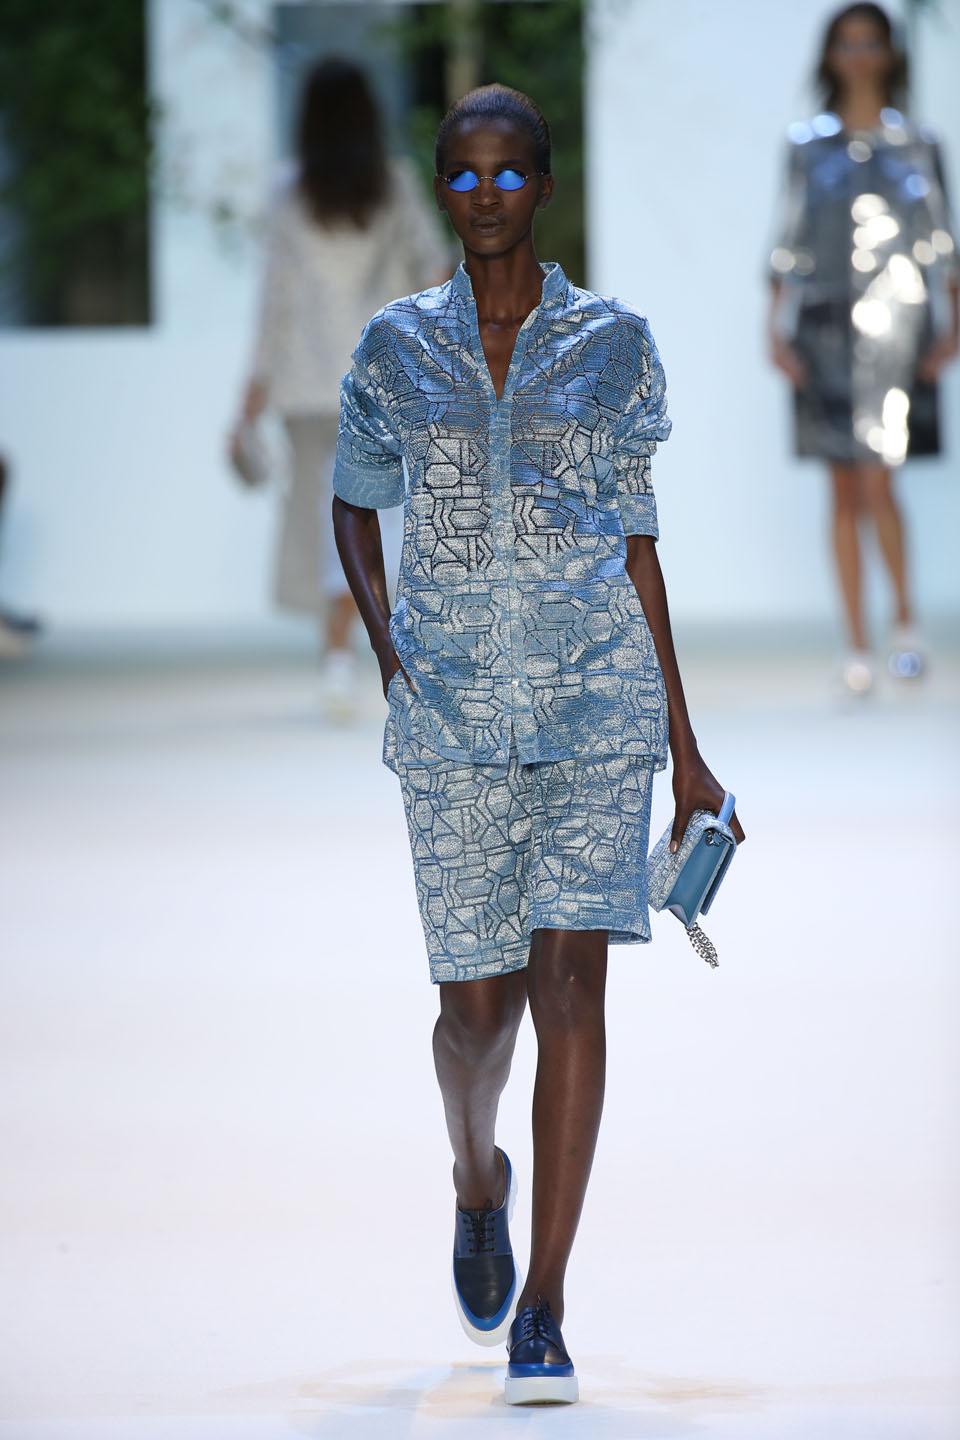 Aamito Lagum (Viva) Sky architectural lurex lace shirt and bermuda Anouk City in lurex lace